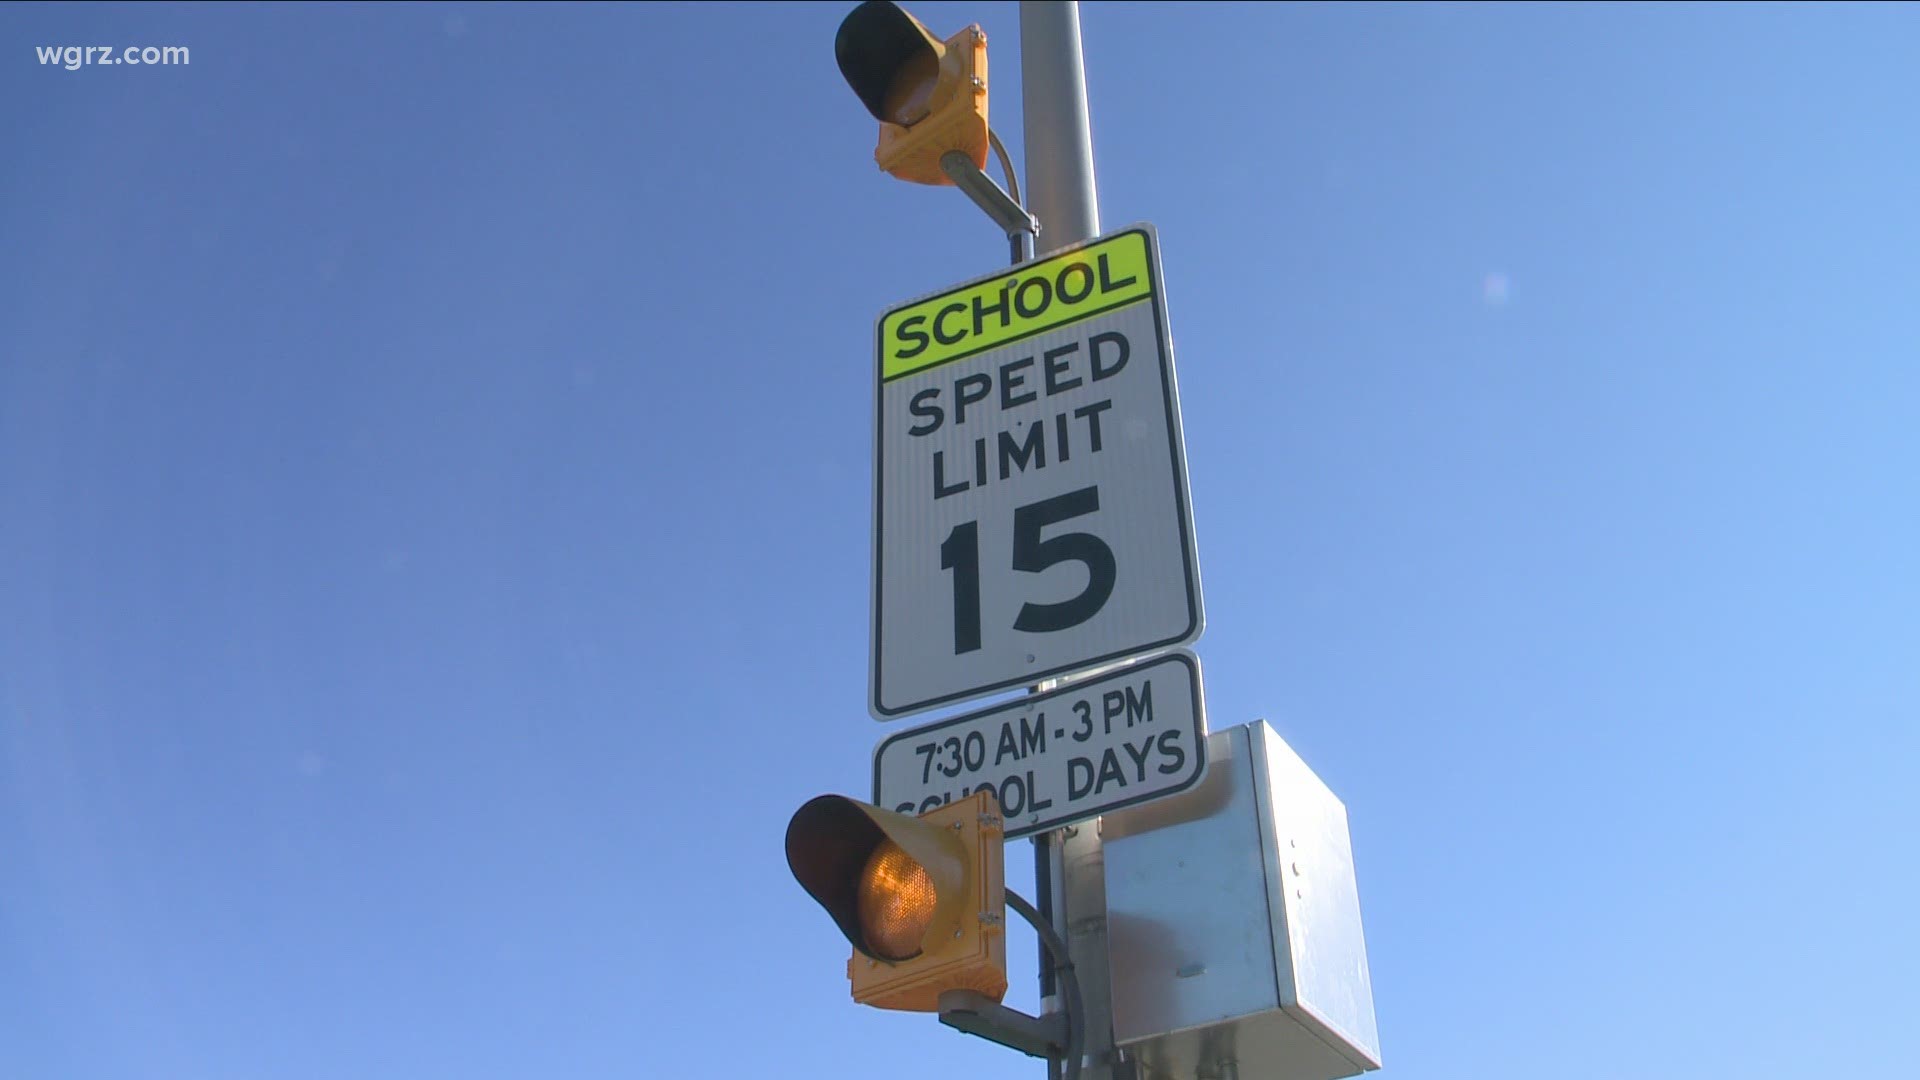 For weeks, viewers have been telling us about their issues with Buffalo's "School Zone Camera" program, from poor signage to getting violations by mistake.